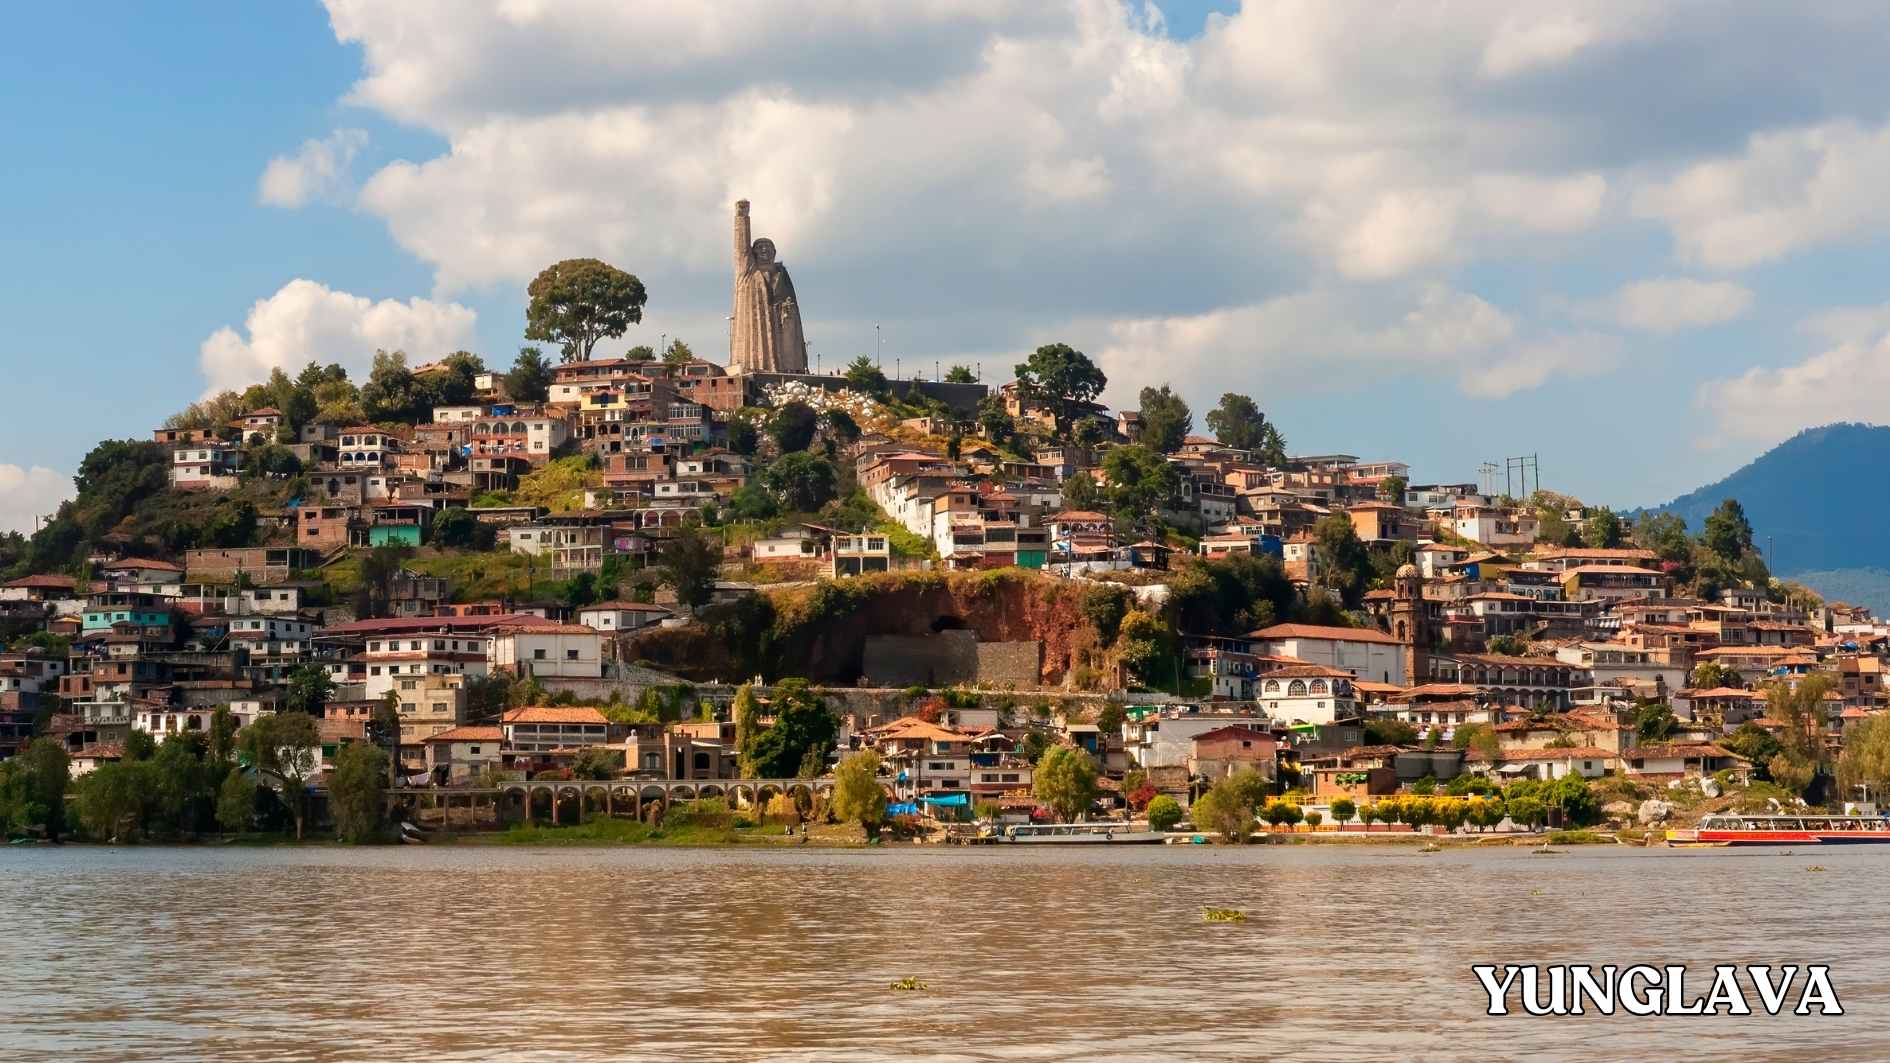 Janitzio Island with the famous Morelos statue